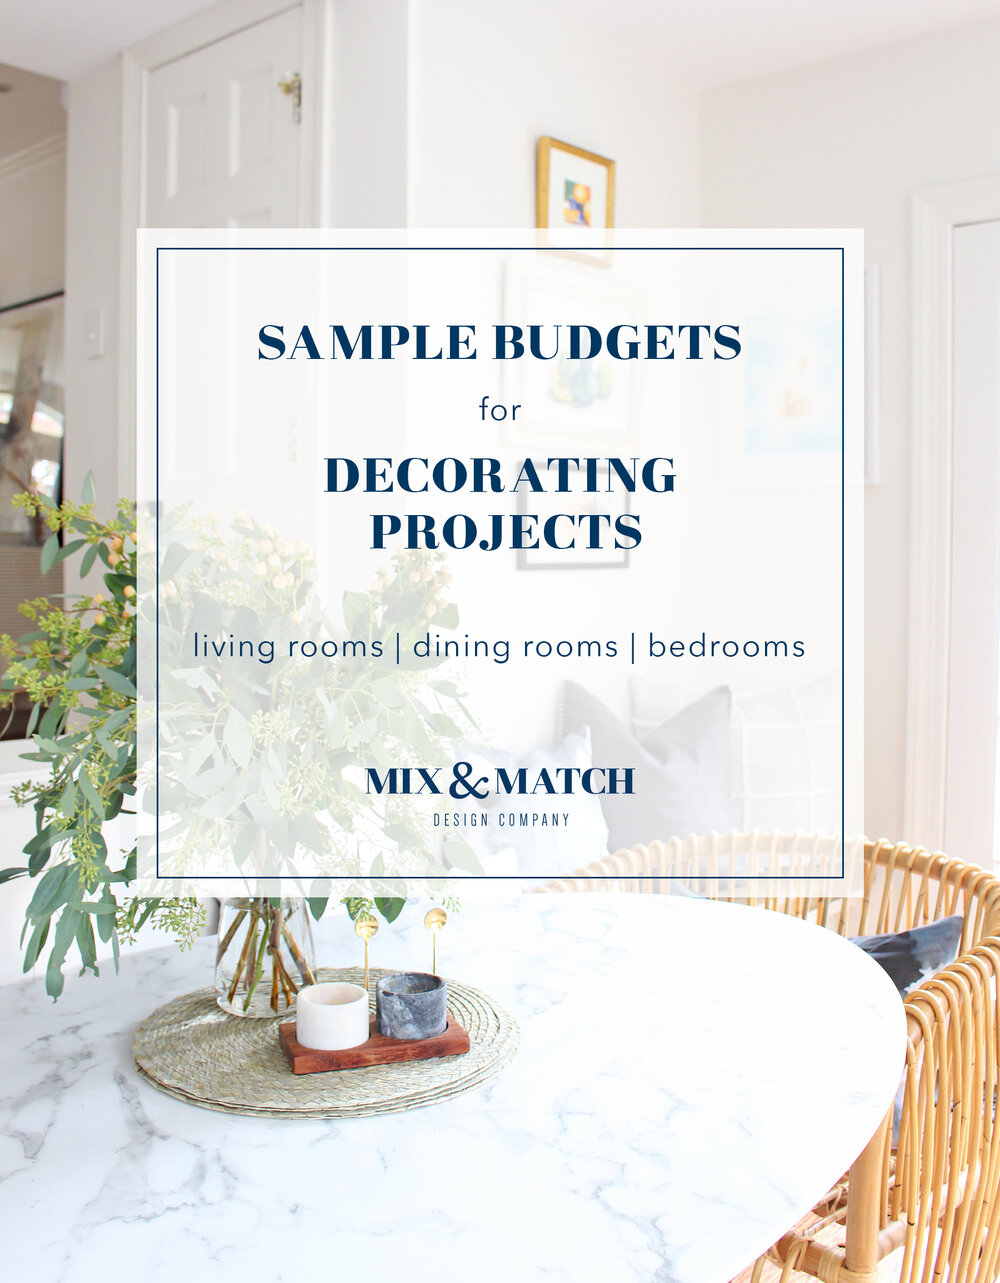 Sample Budgets For Living Rooms, Dining Rooms, and Bedrooms Inside Interior Design Budget Template Throughout Interior Design Budget Template